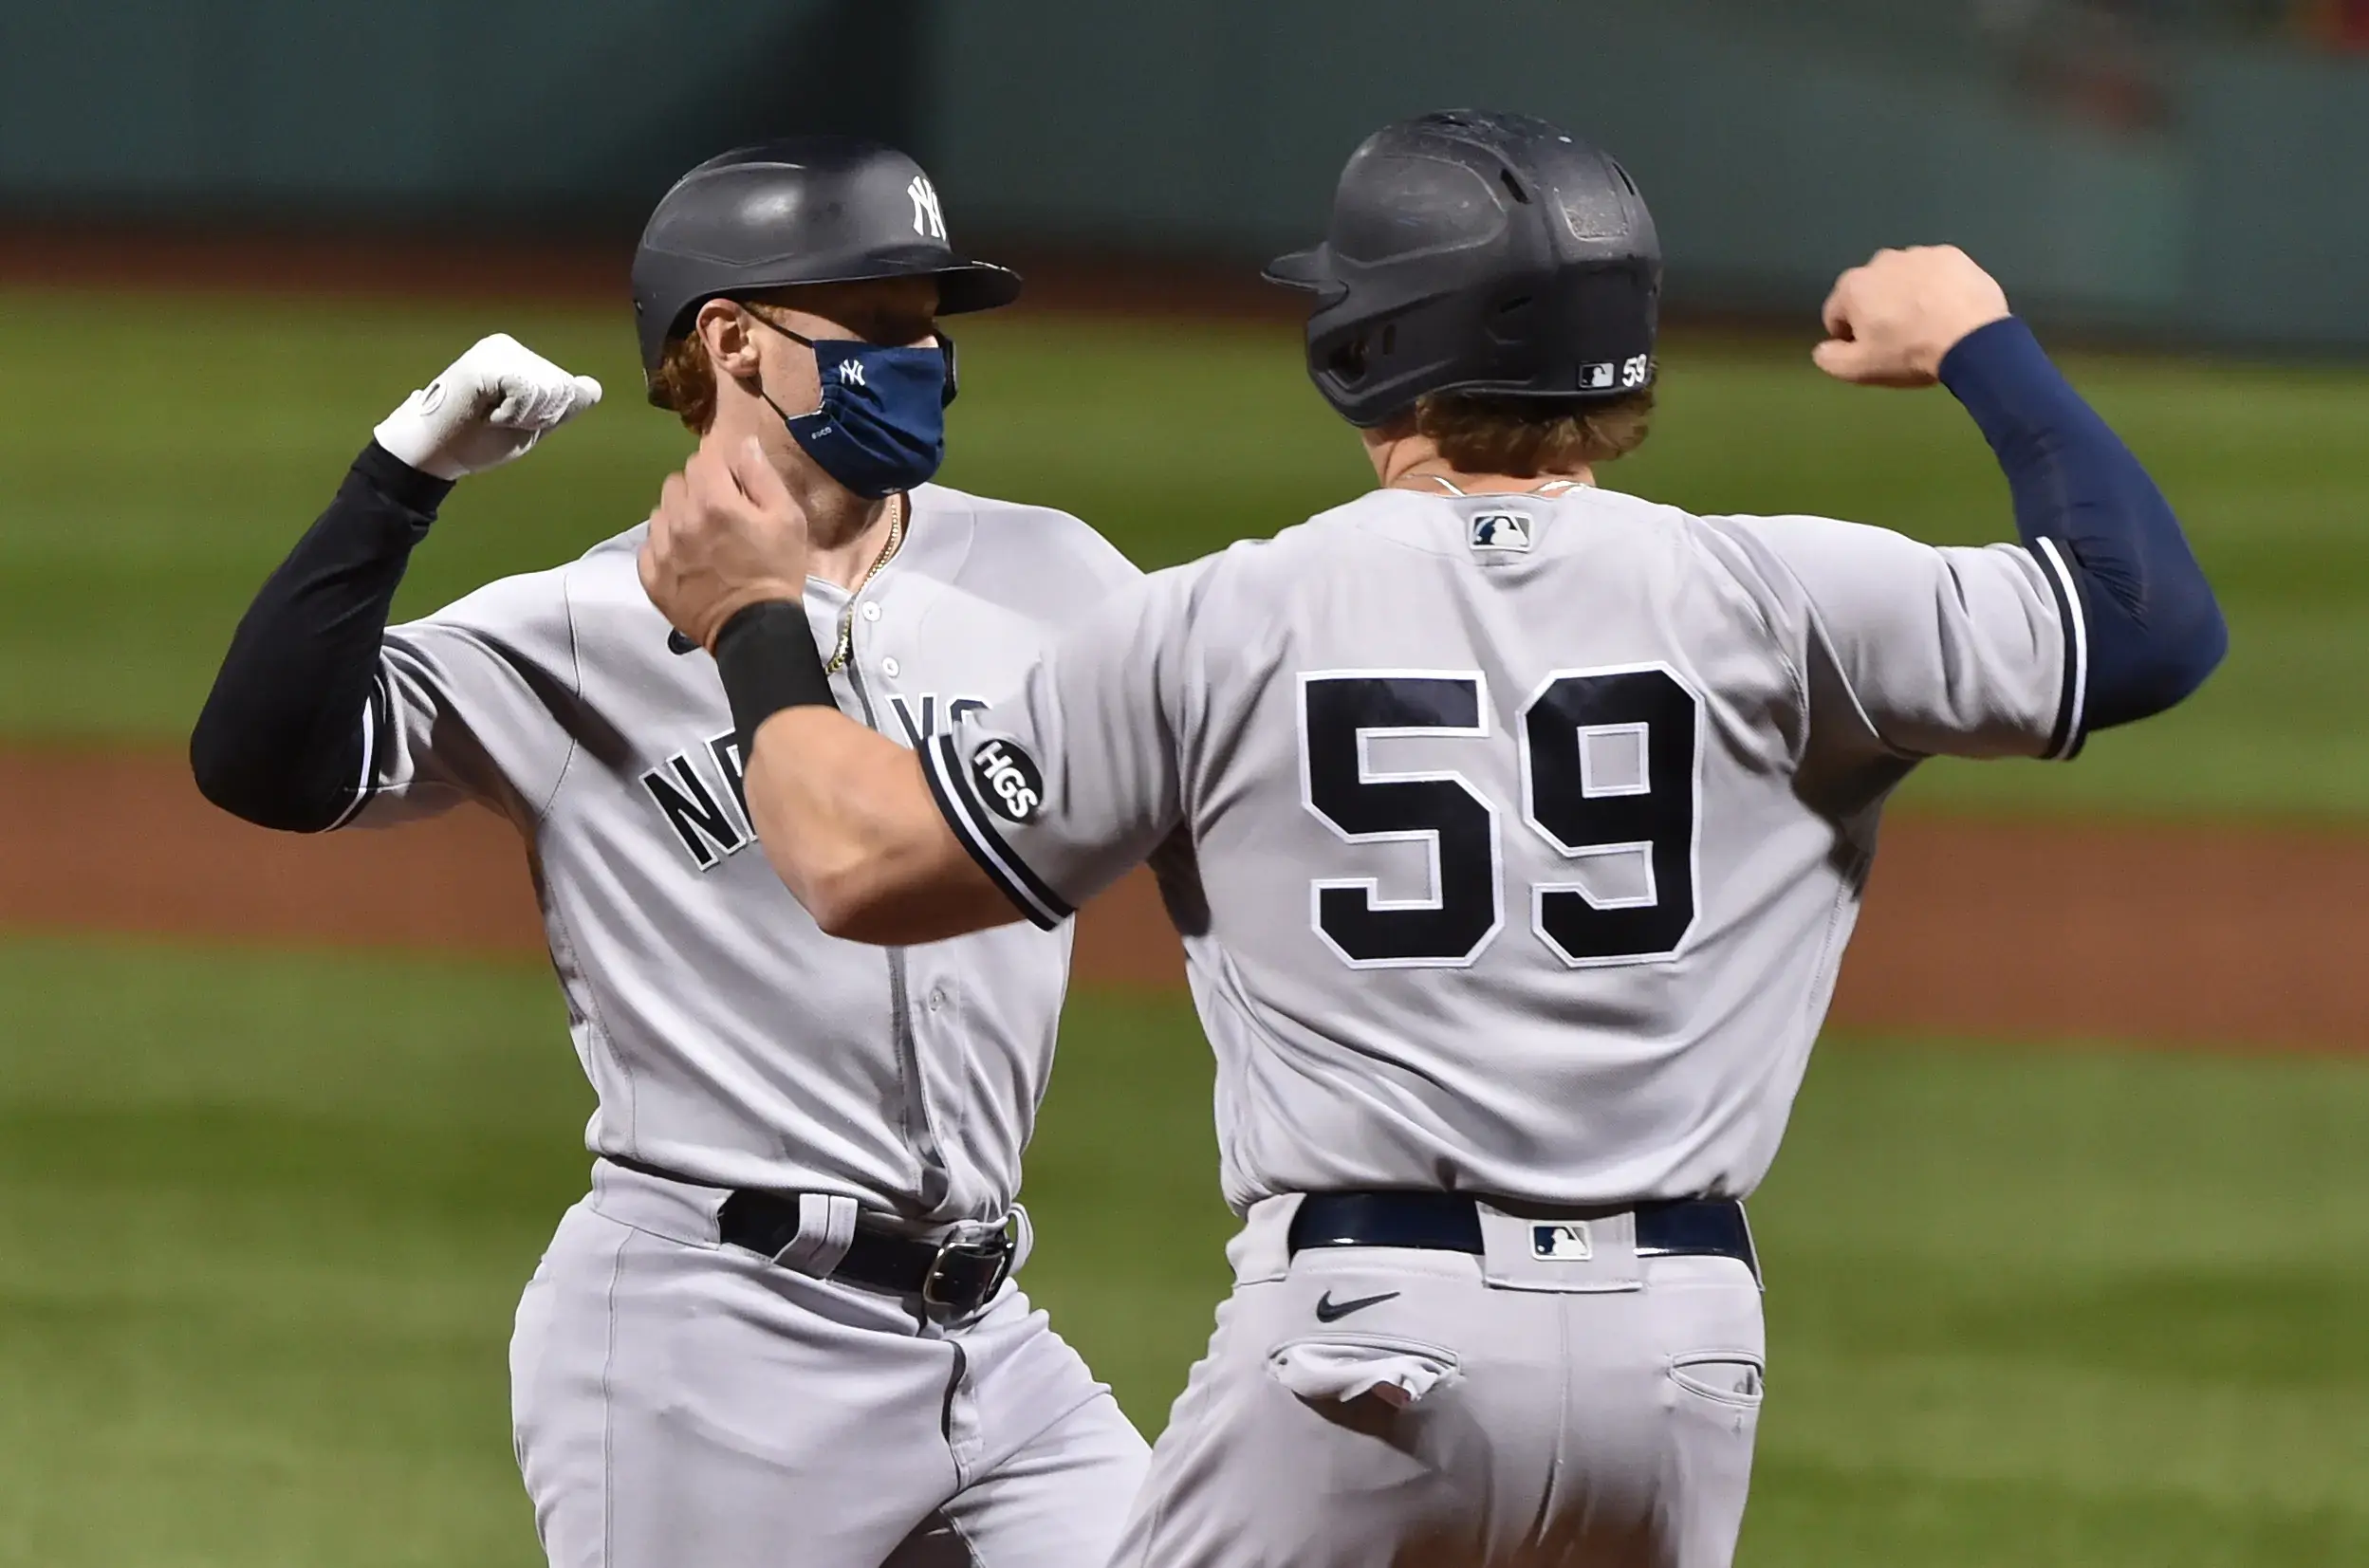 Sep 19, 2020; Boston, Massachusetts, USA; New York Yankees left fielder Clint Frazier (77) reacts with first baseman Luke Voit (59) after hitting a two run home run during the fifth inning against the Boston Red Sox at Fenway Park. Mandatory Credit: Bob DeChiara-USA TODAY Sports / © Bob DeChiara-USA TODAY Sports